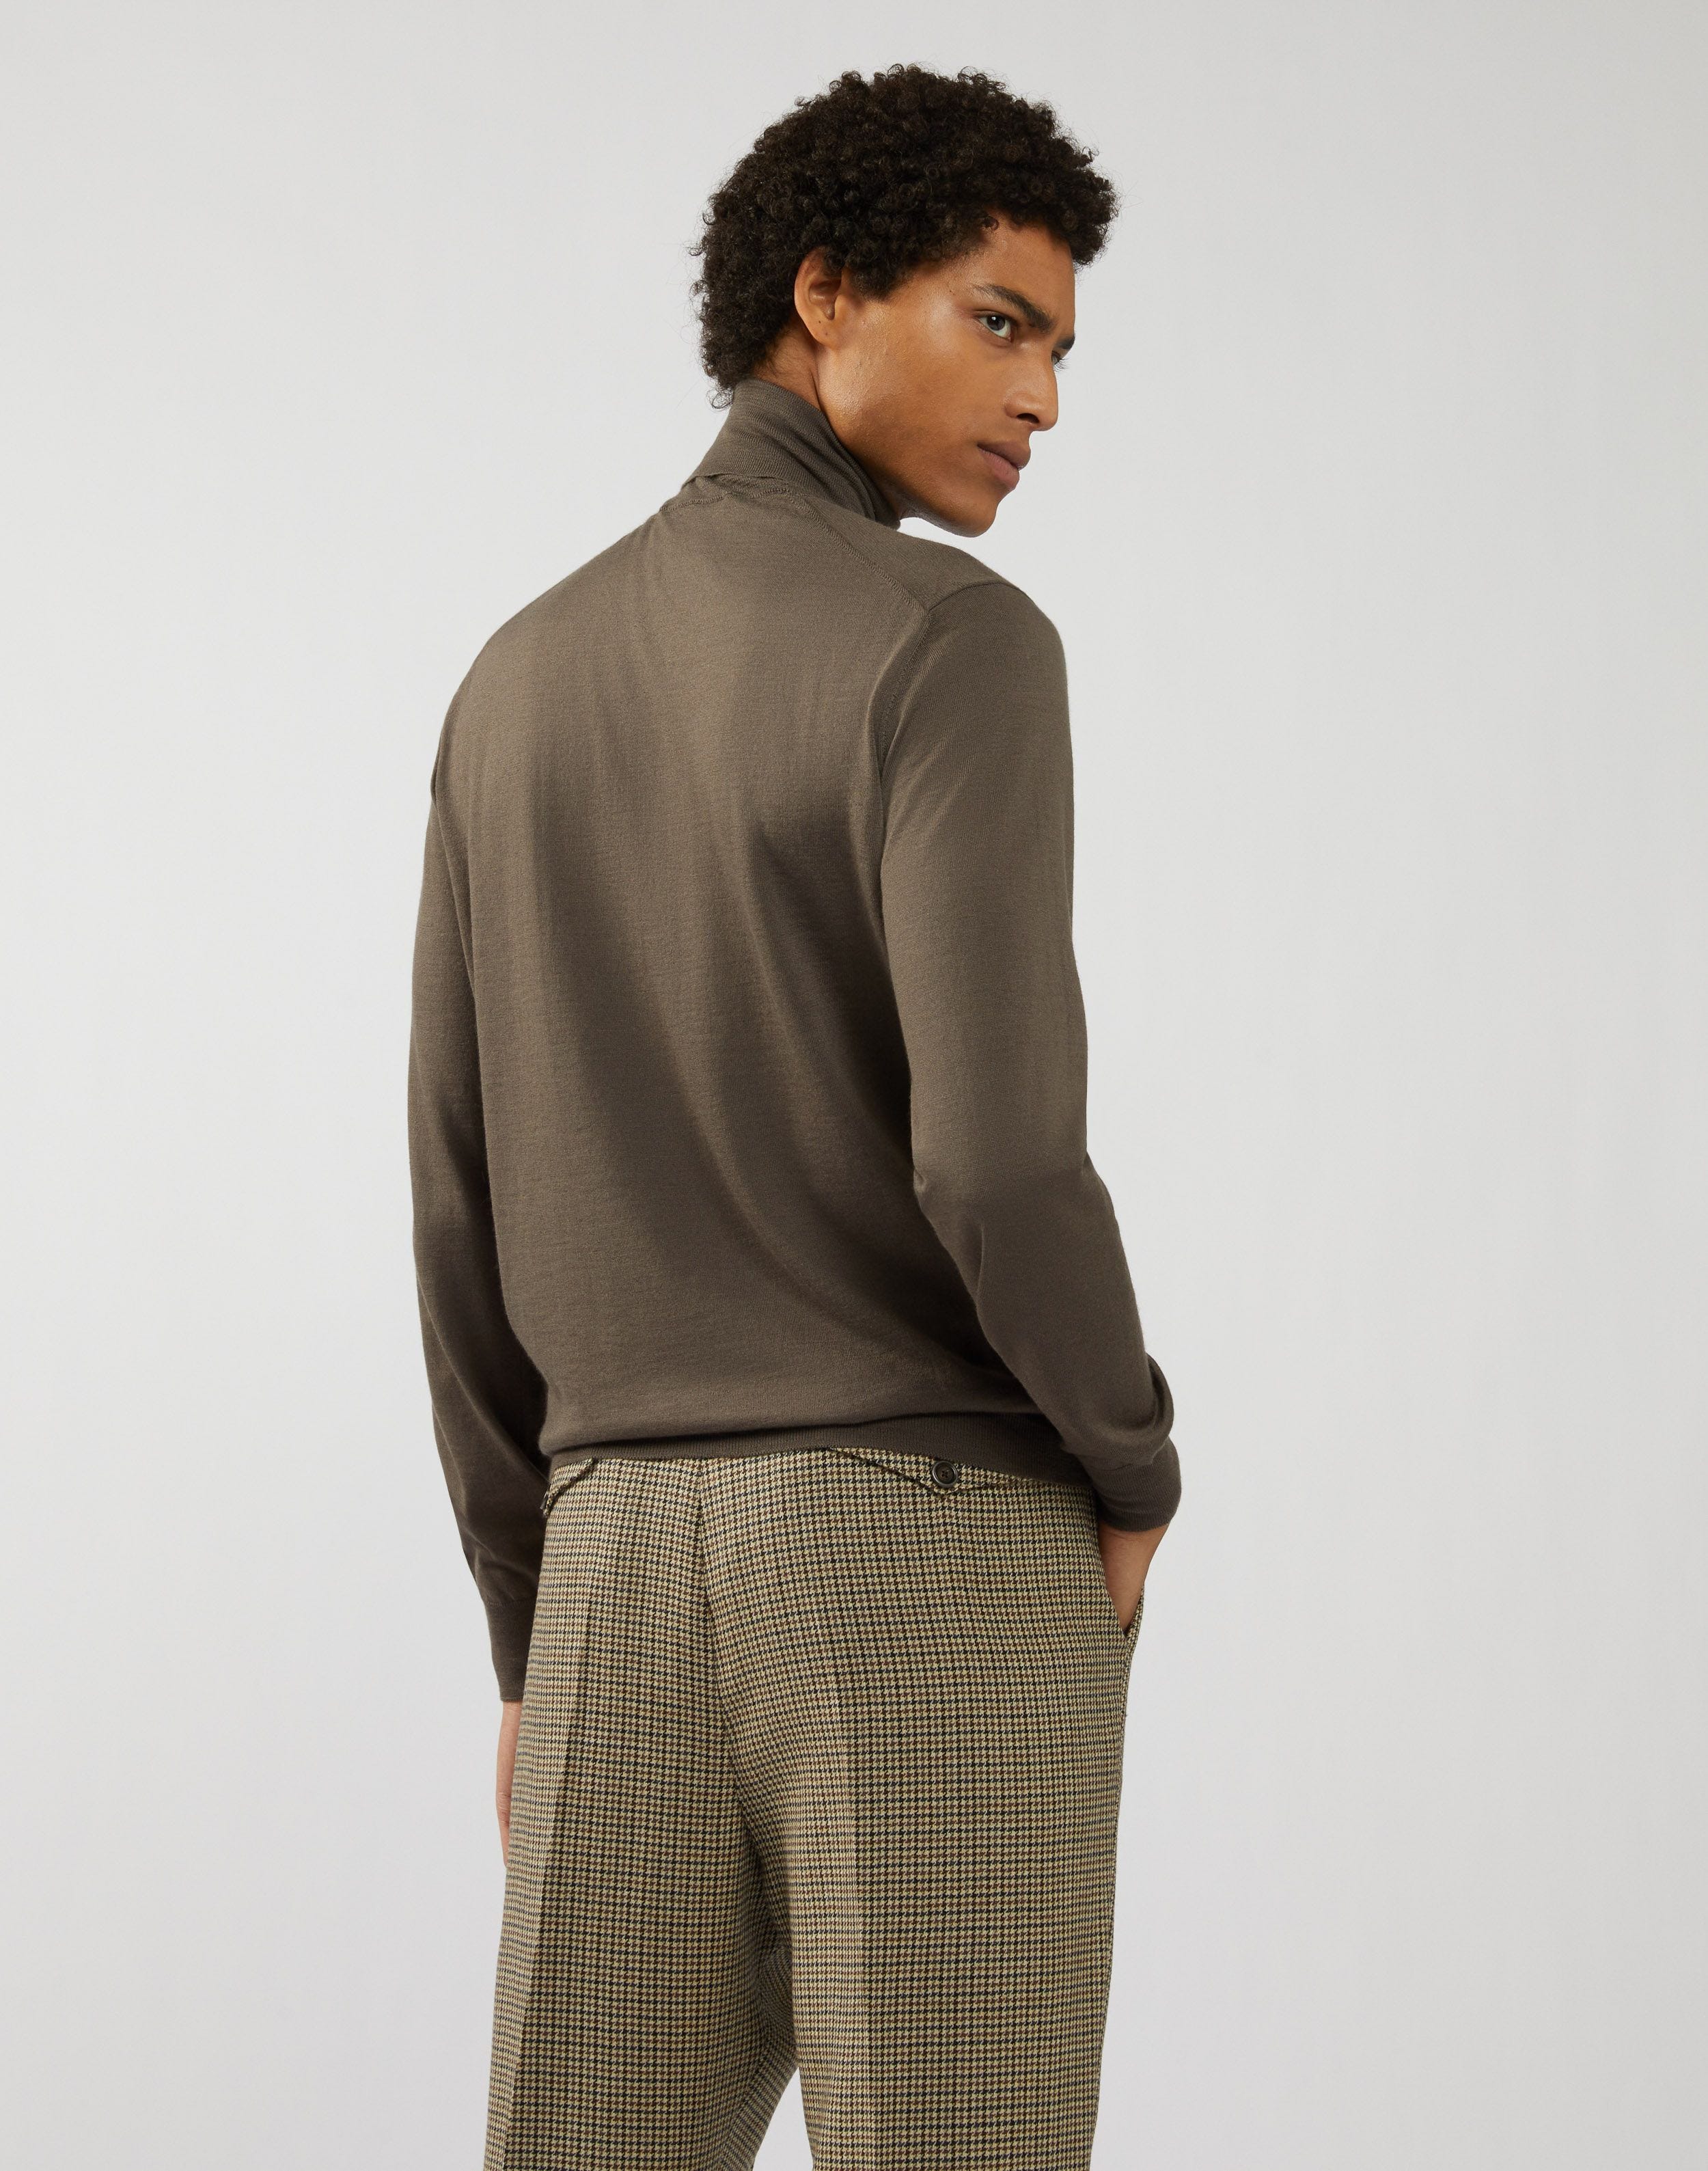 Brown turtleneck in wool, silk and cashmere